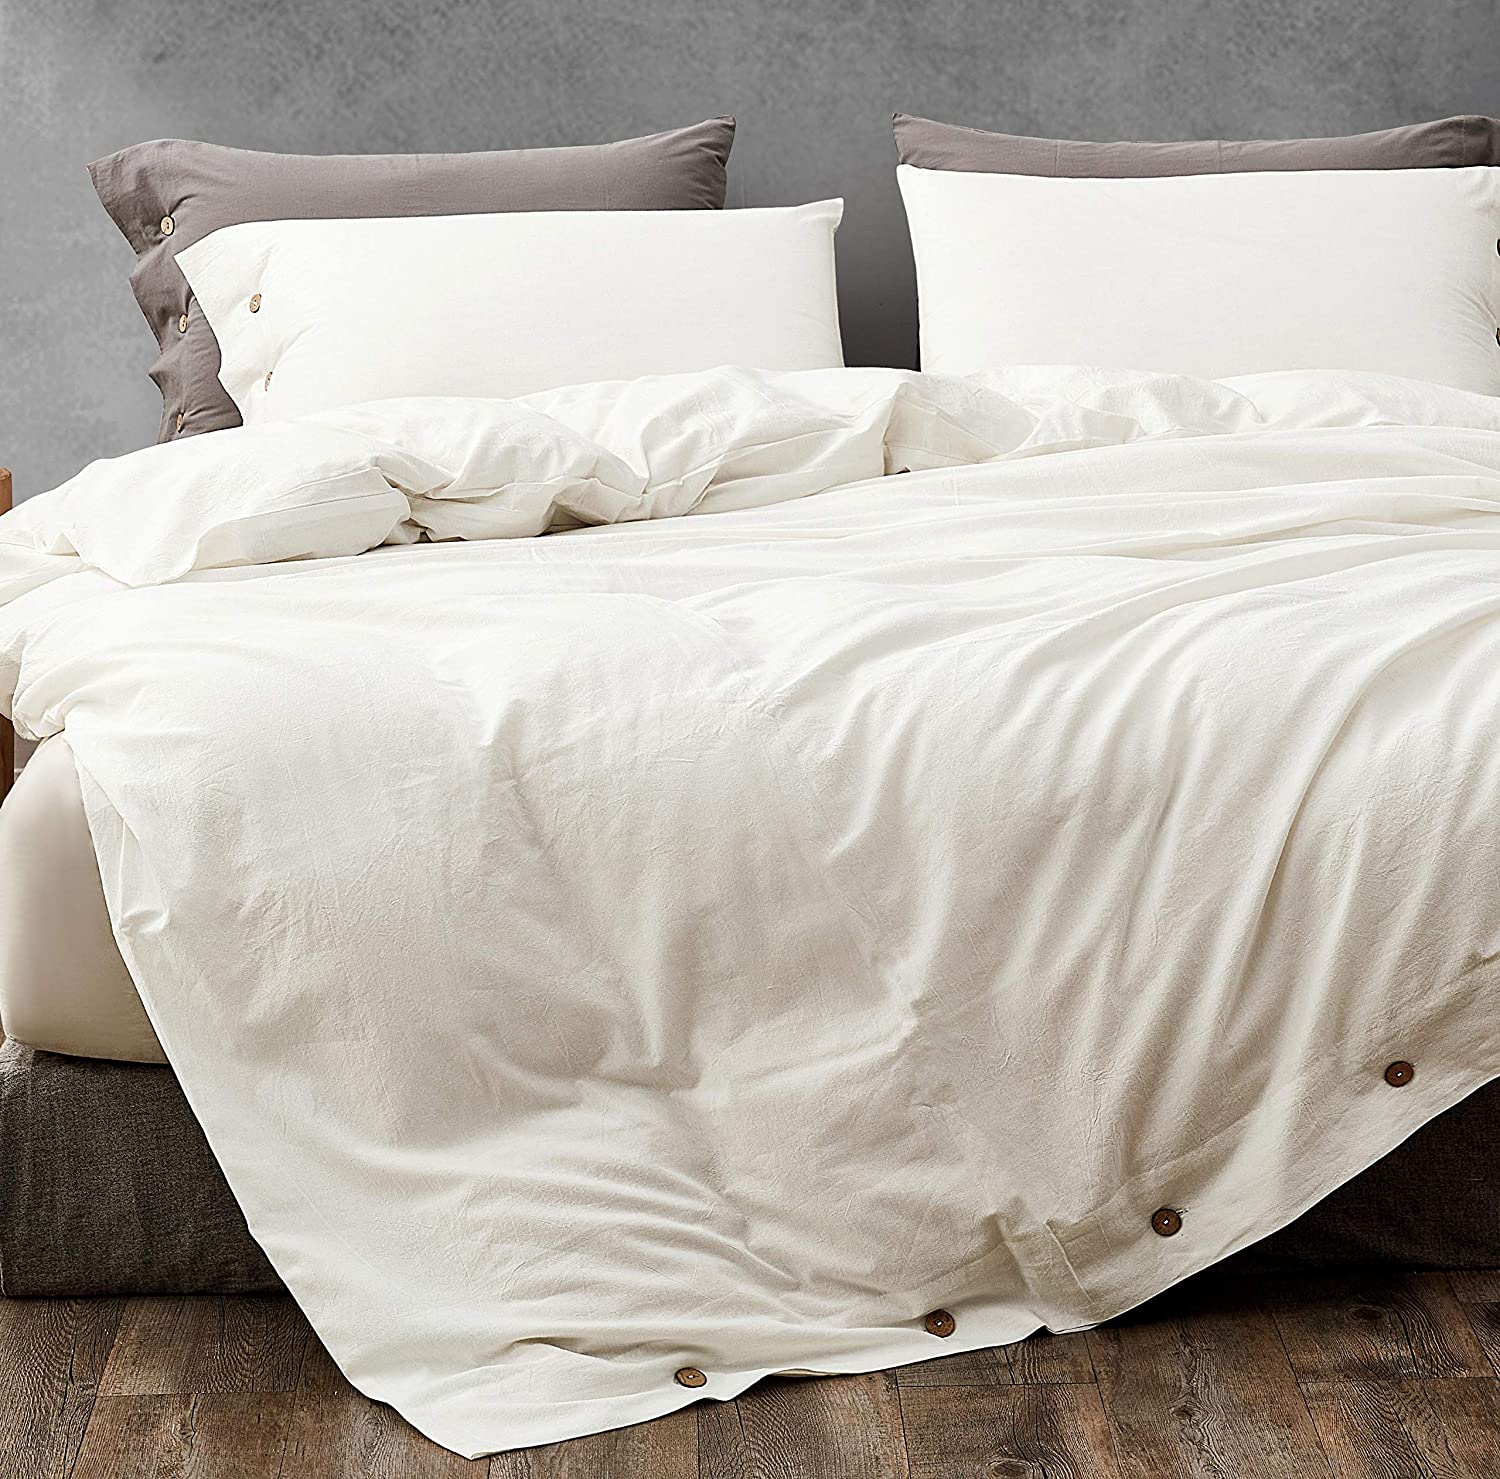 Price:$50.00  Cotton Duvet Cover Queen Full Size, White Organic Cotton, Soft, Cooling, Breathable Bedding Collection with Buttons Closure. 3 Pieces Solid Color (1 Comforter Cover + 2 Pillow Cases) : Home & Kitchen